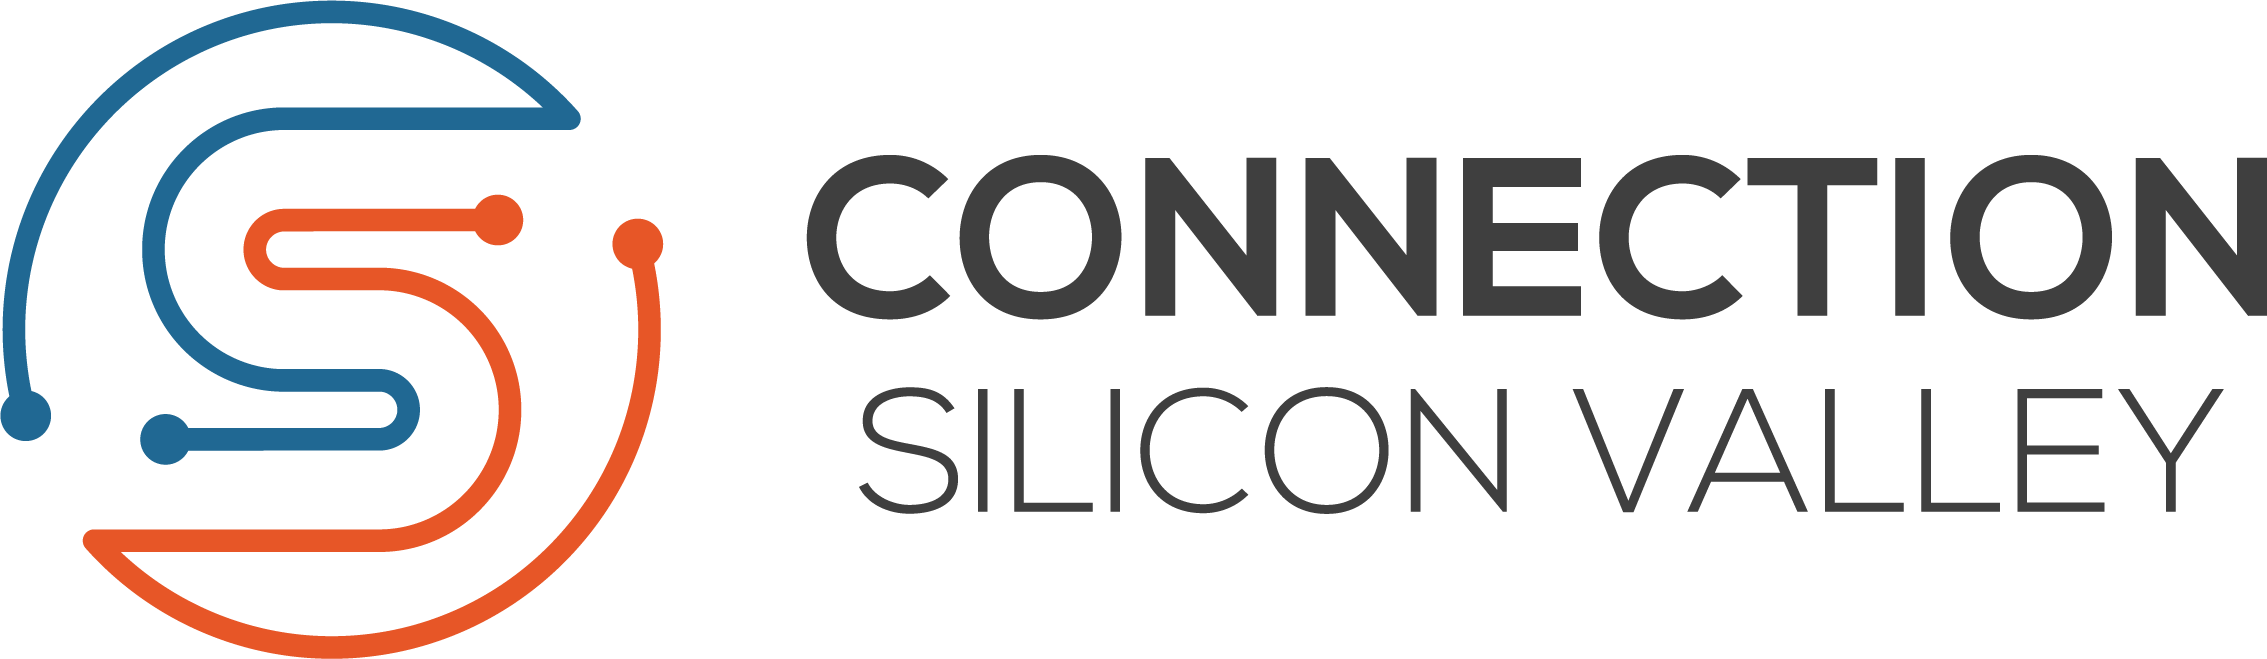 Connection-Silicon-Valley-big-logo.png